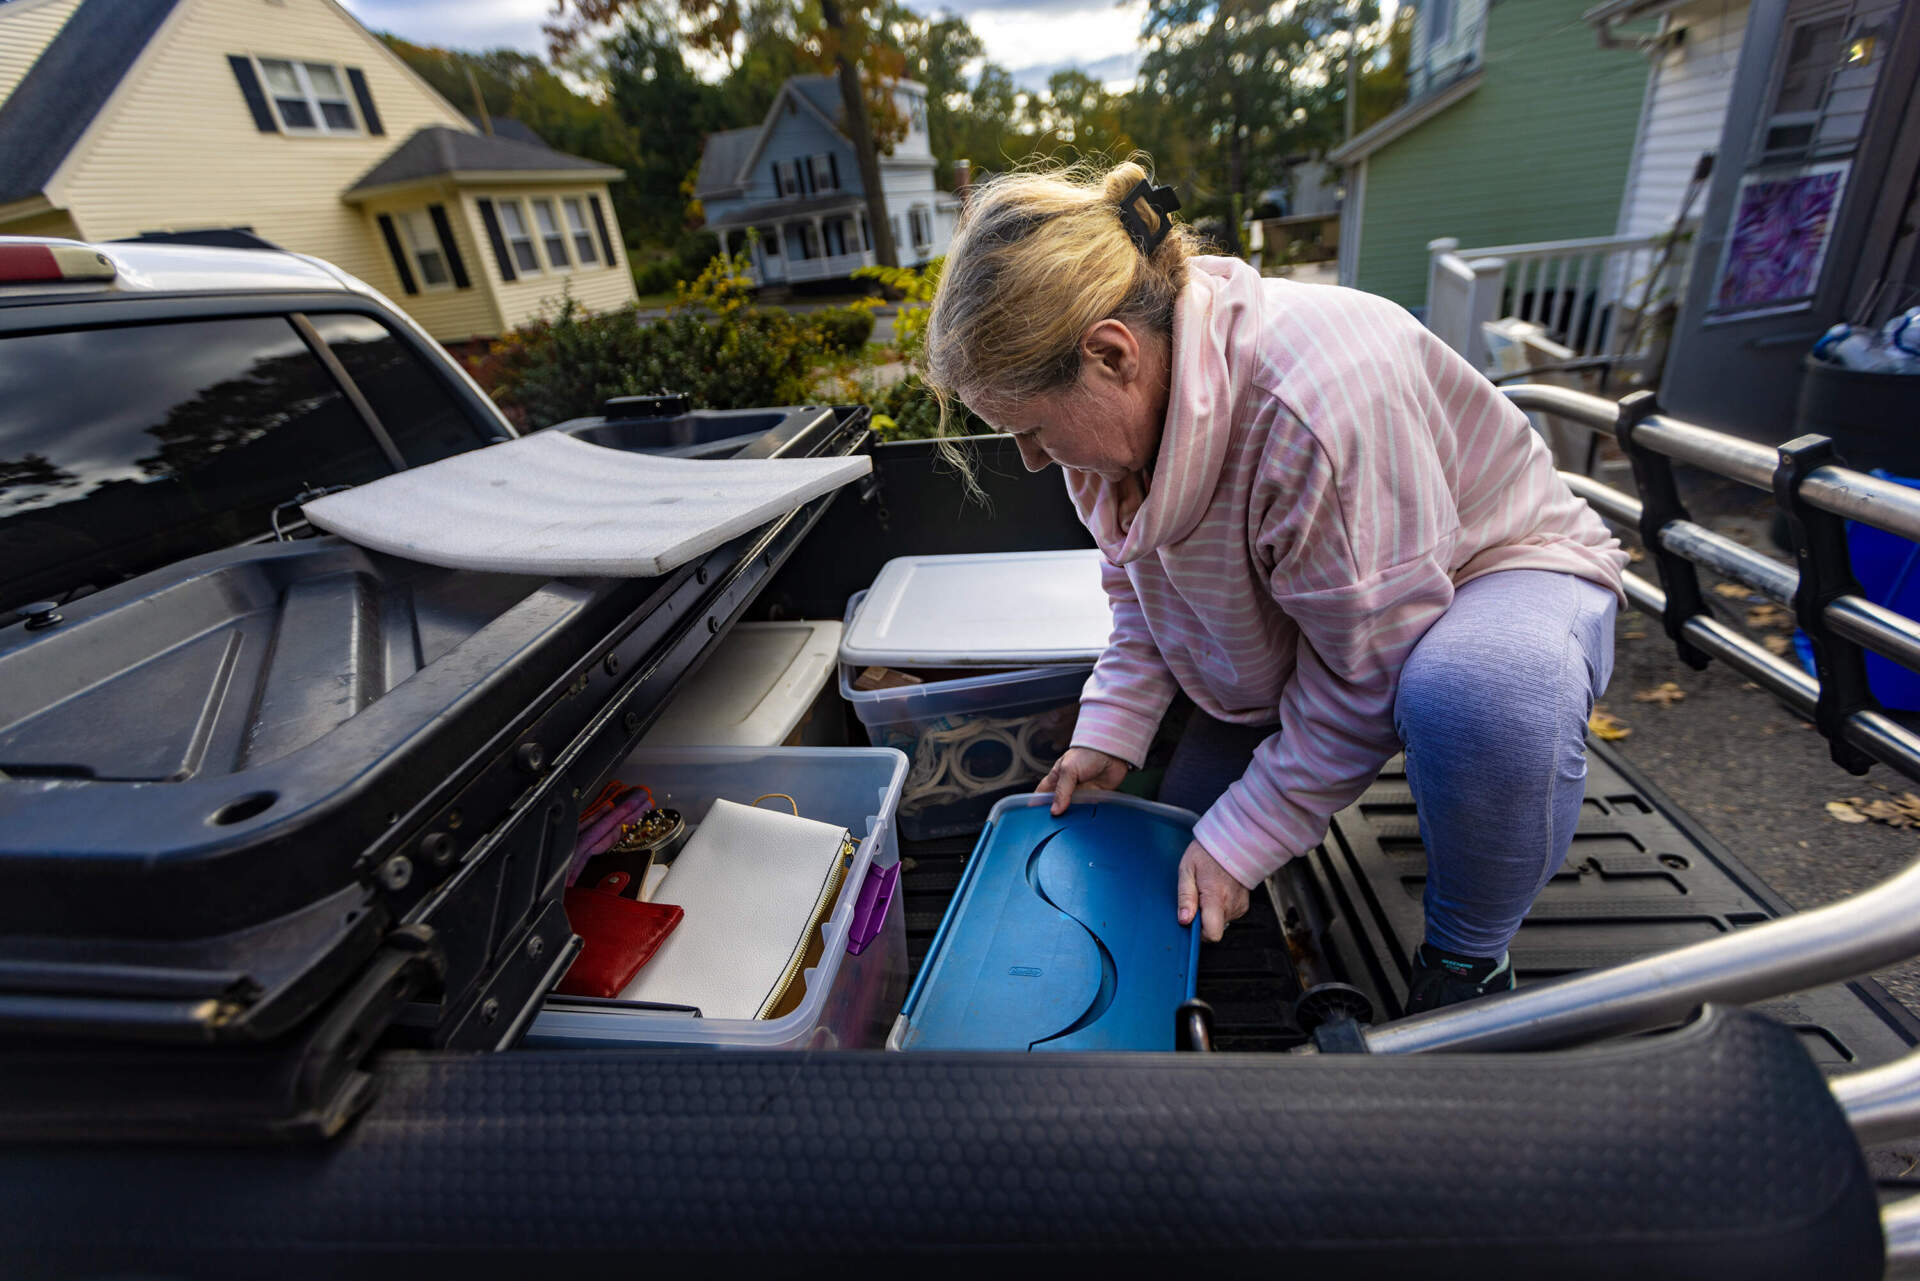 Deborah Libby loads her belongings into her pick-up truck as she is being evicted from her apartment in Worcester. (Jesse Costa/WBUR)